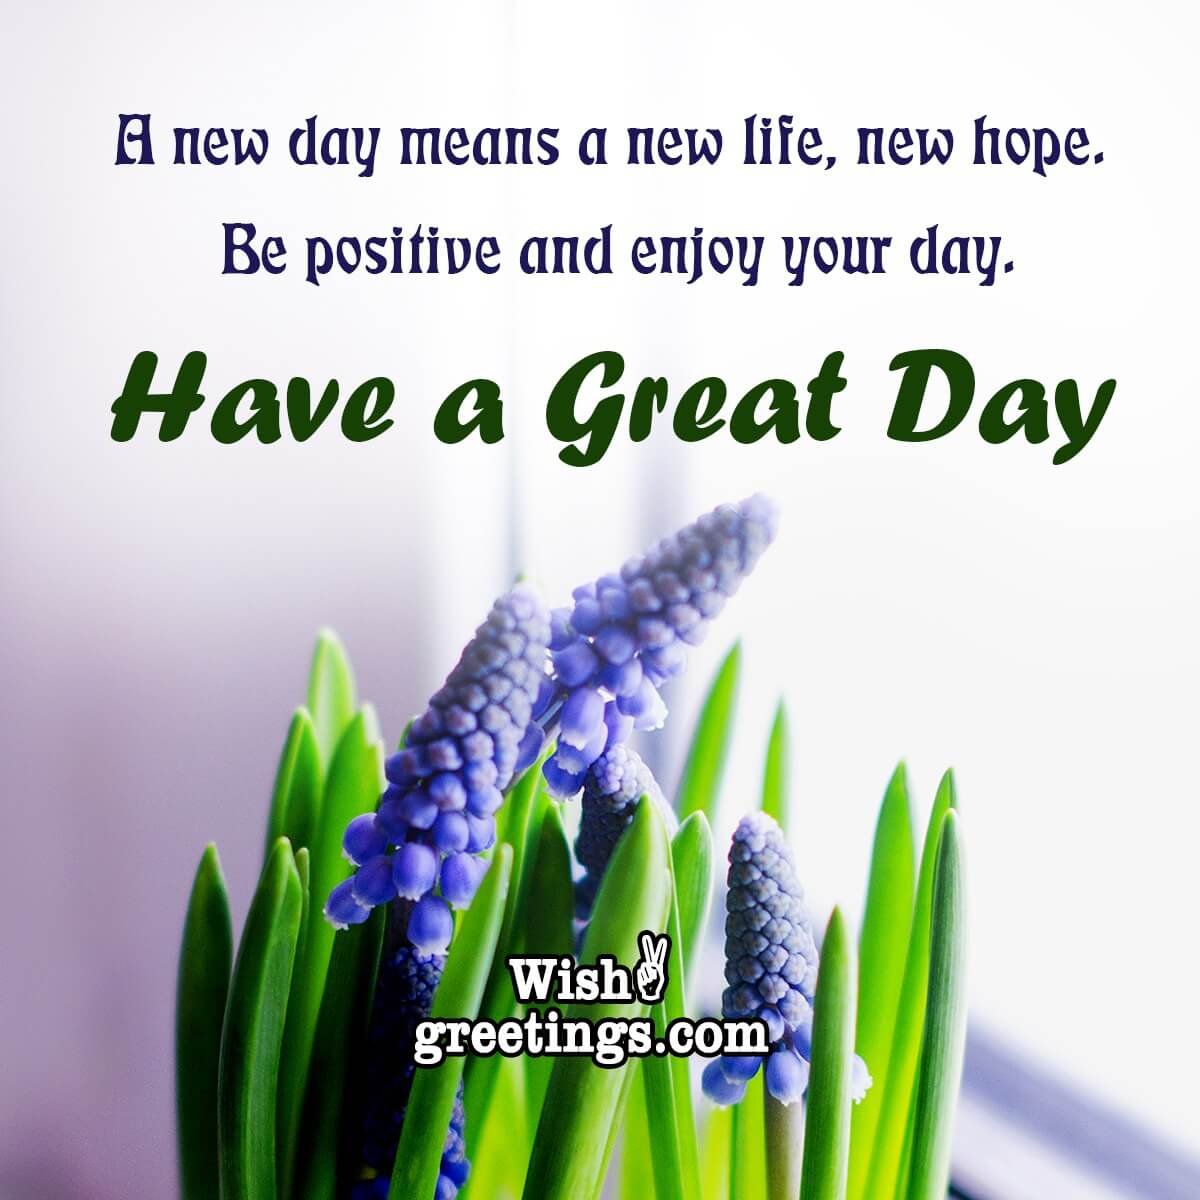 have a great day messages